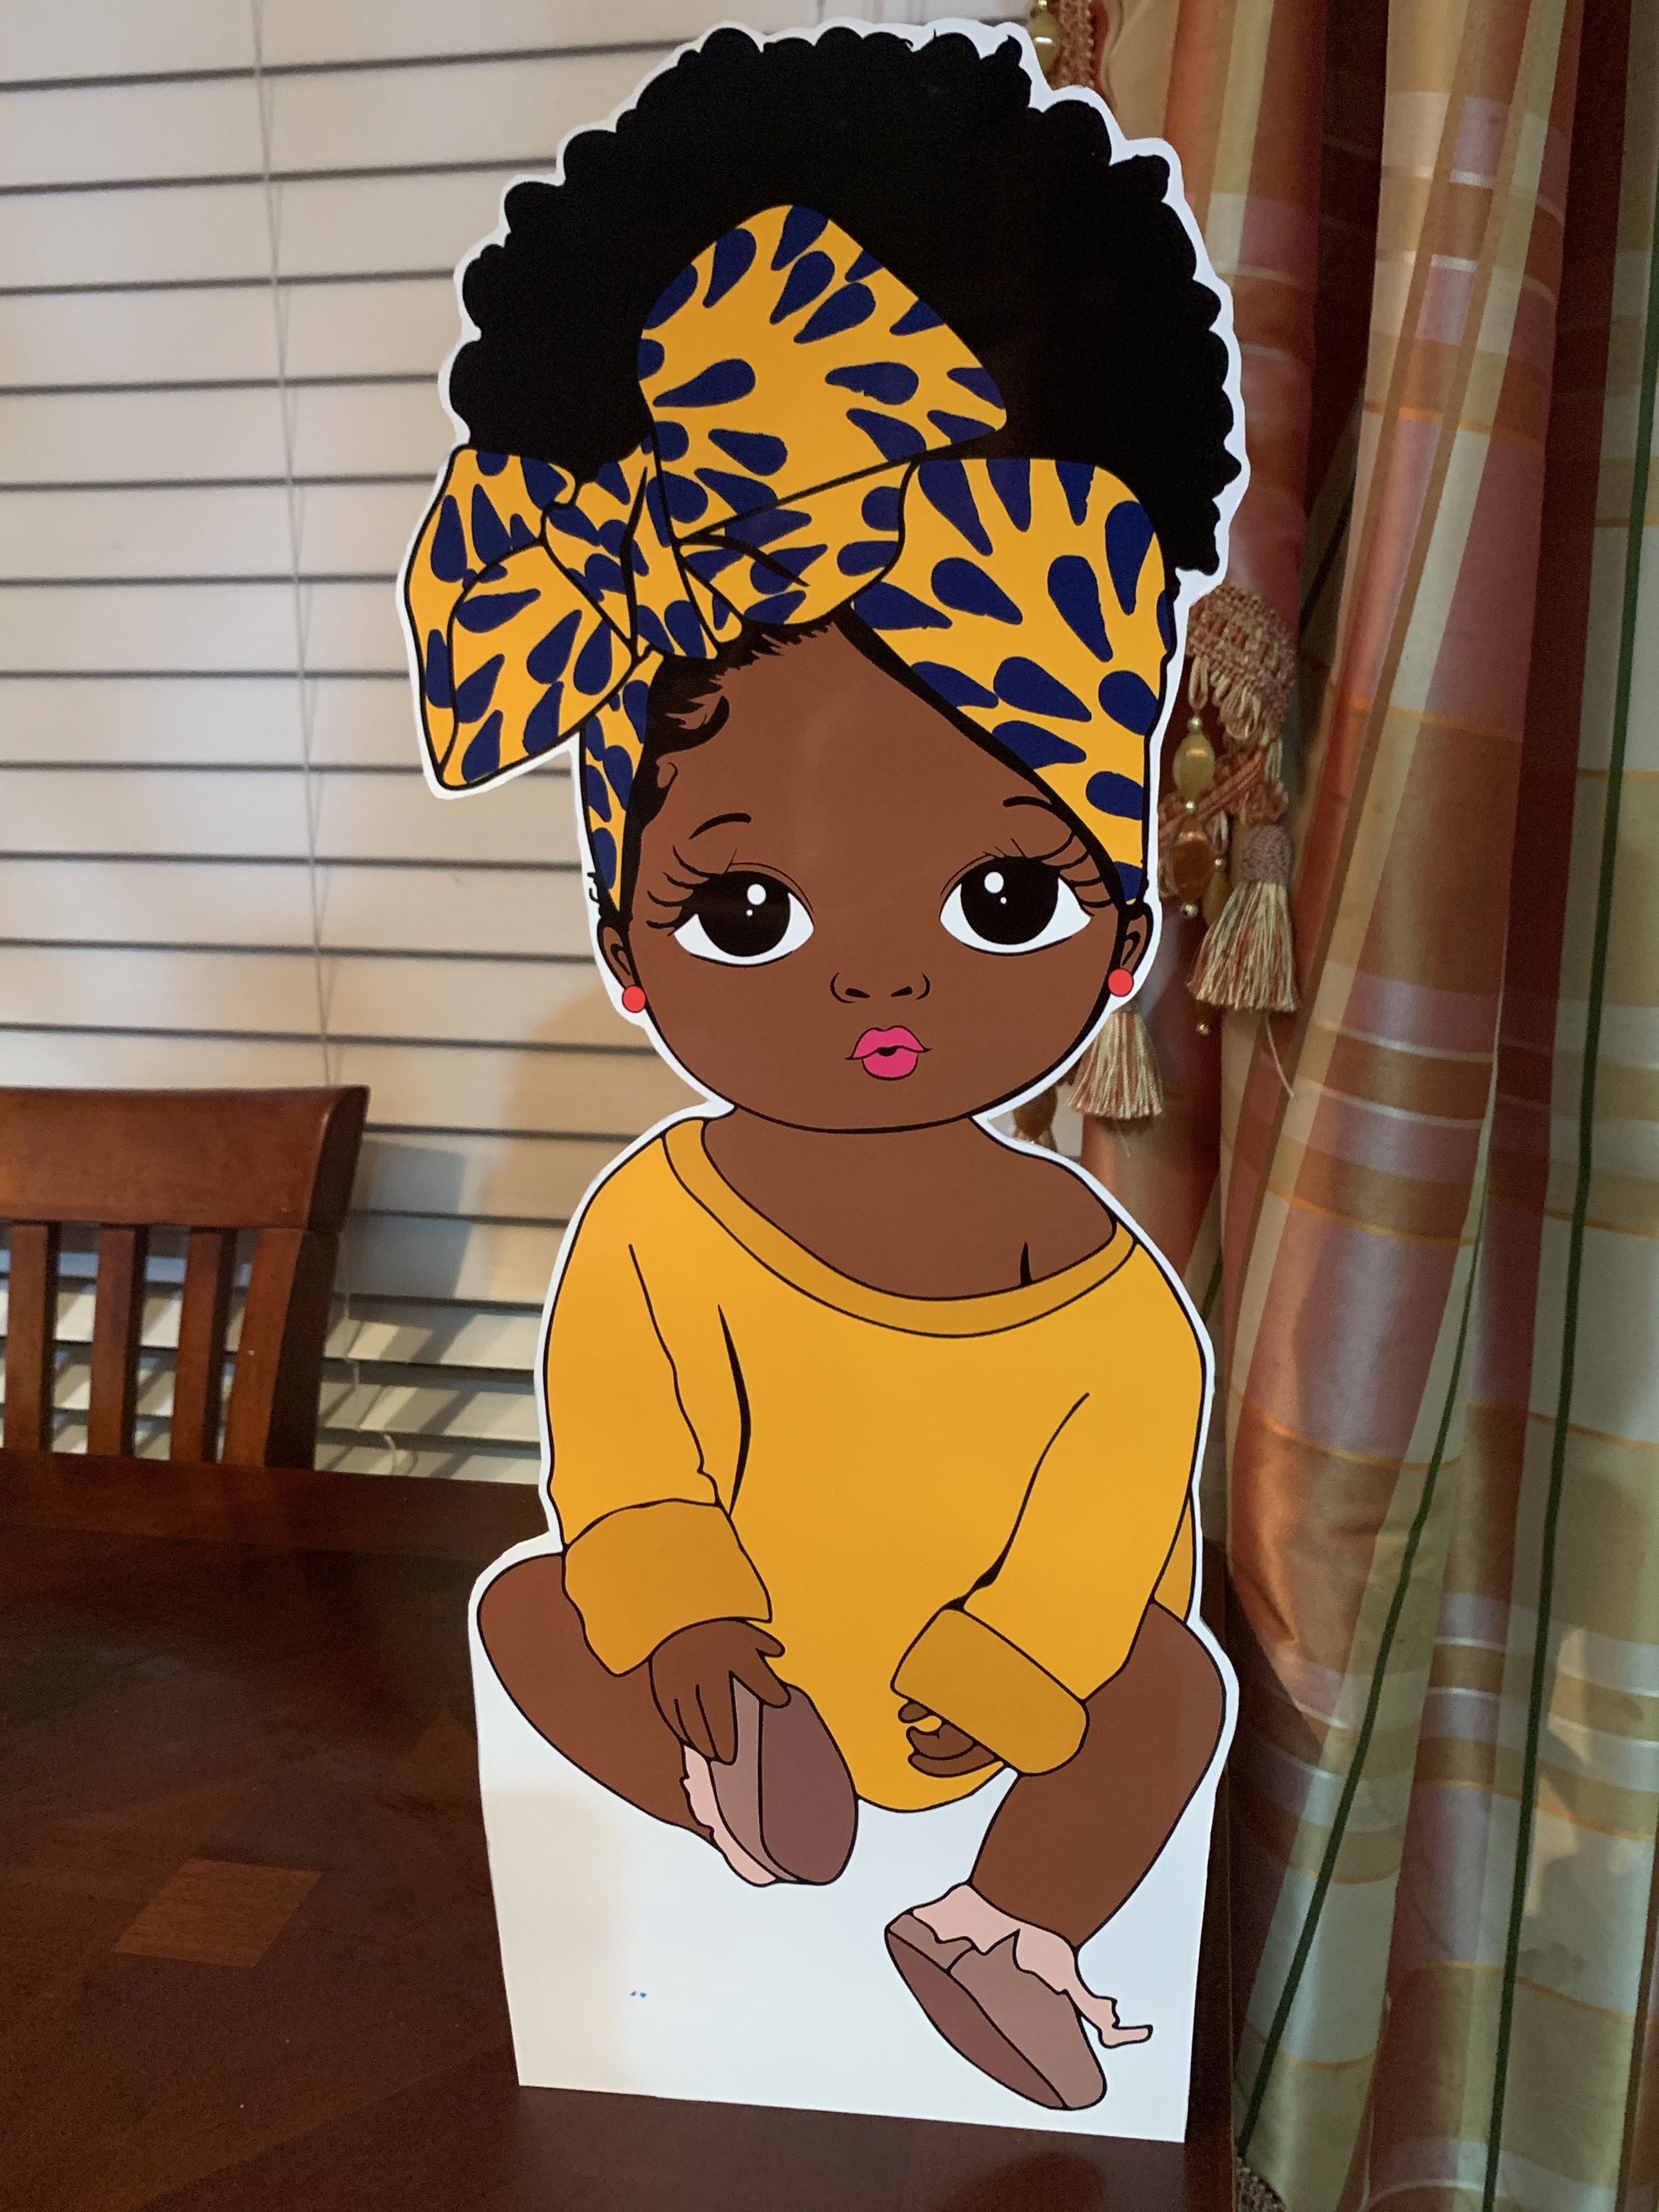 Cute African American Girl Puff Hair Babies Standing Decor Party Props Etsy. Baby girl art, Black baby art, Baby clip art